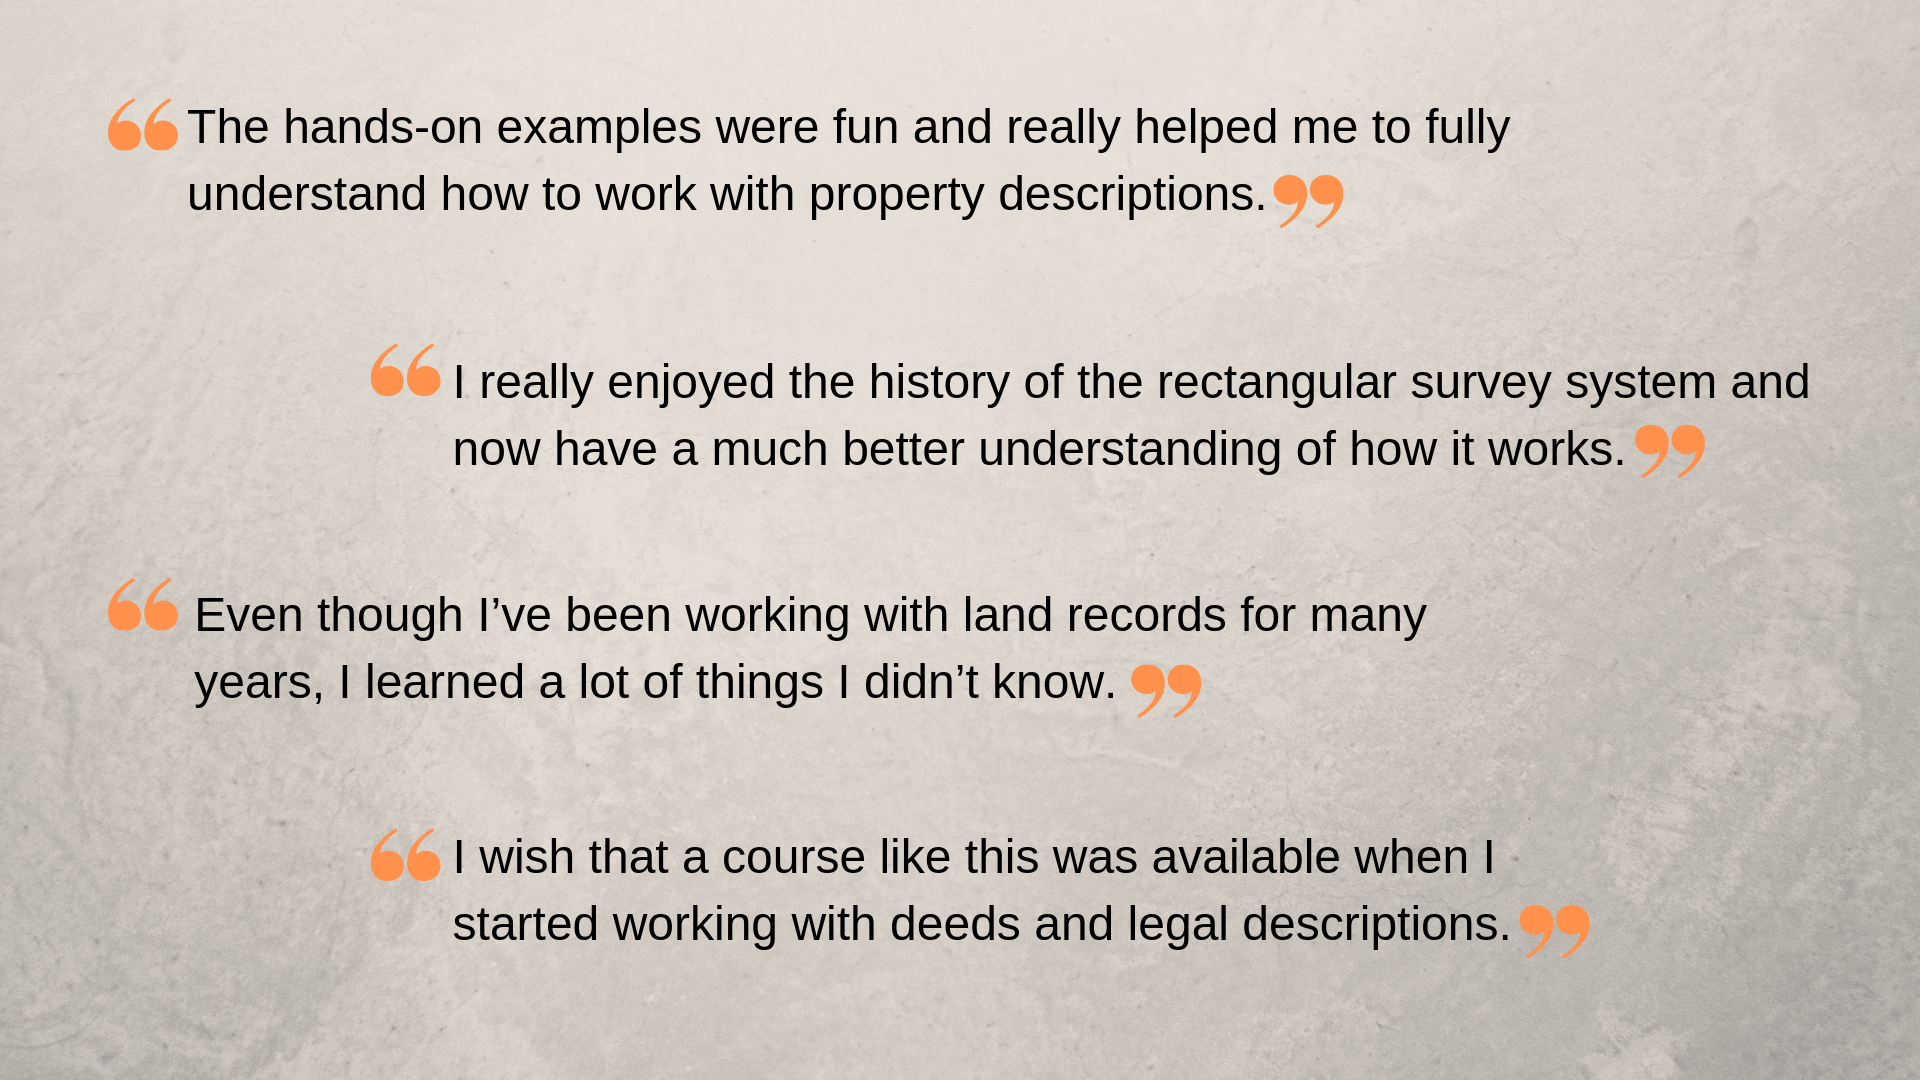 “I really enjoyed the history of the rectangular survey system and now have a much better understanding of how it works.” “The hands-on examples were fun and really helped me to fully understand how to work with property descriptions.”  Even though I’ve been working with land records for many years, I learned a lot of things I didn’t know.” “I wish that a course like this was available when I started working with deeds and legal descriptions.”   